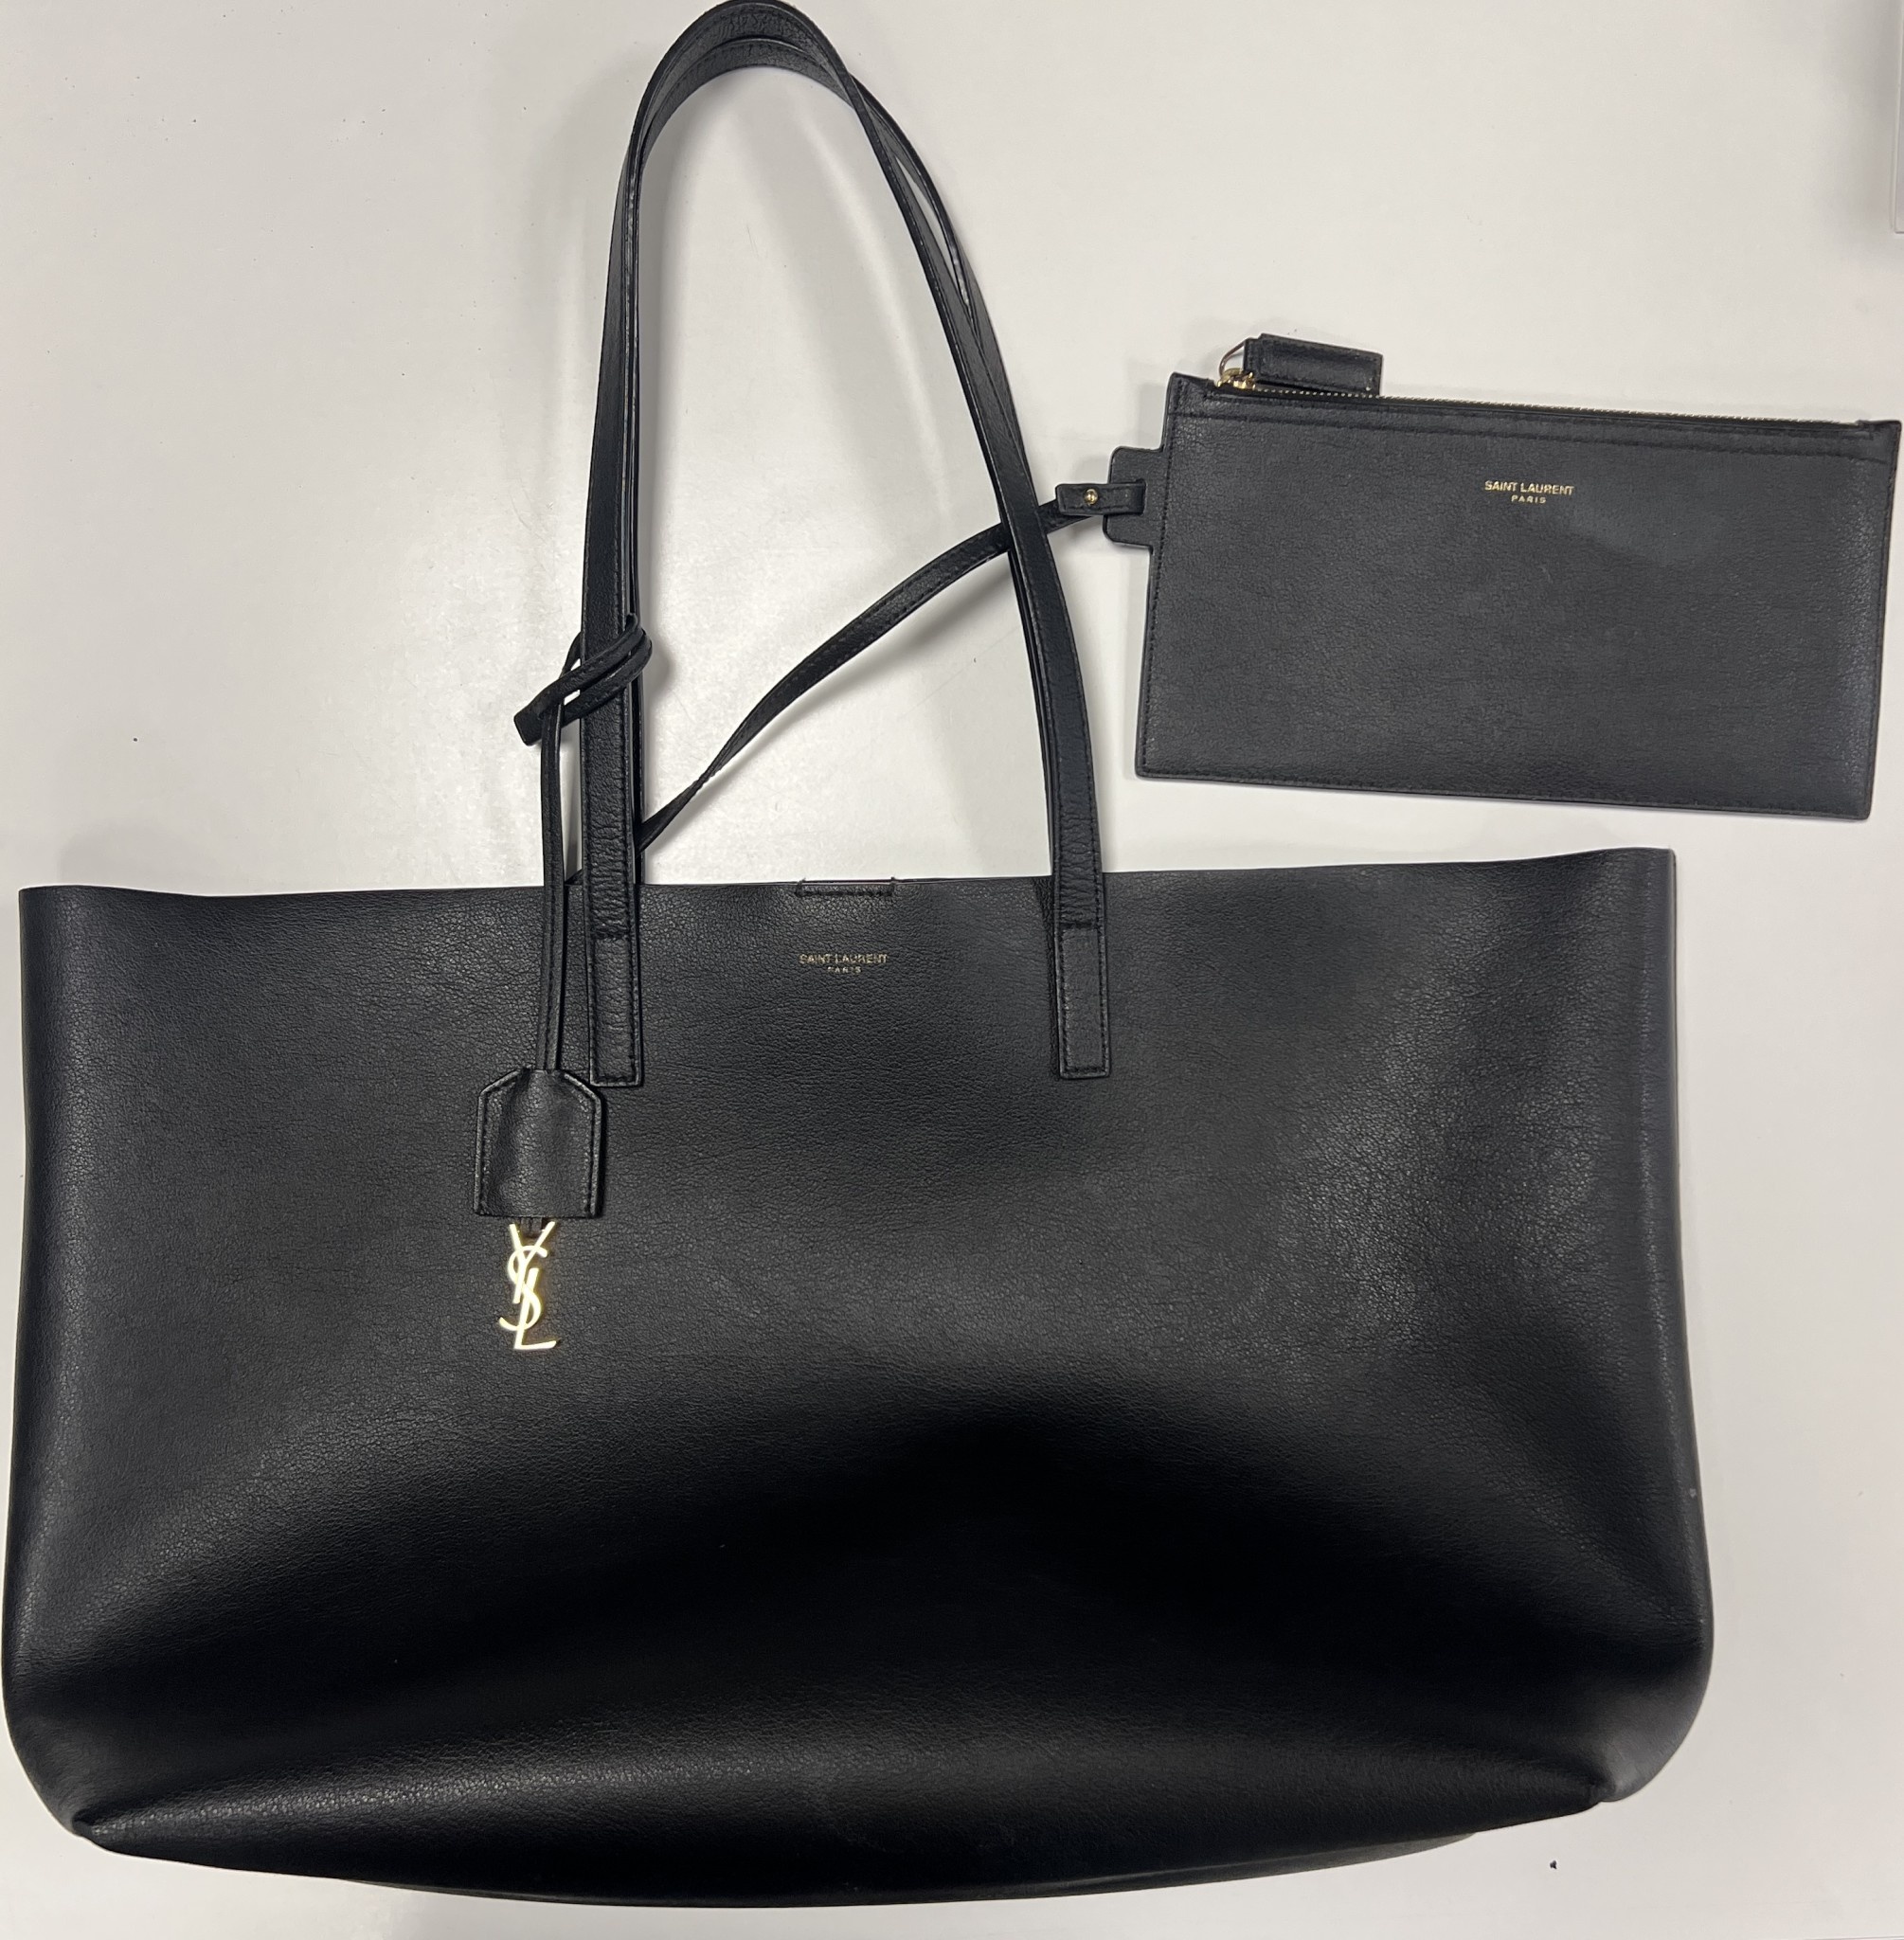 SAINT LAURENT DEAL OF THE DAY SAINT LAURENT SHOPPING TOTE BLACK LEATHER